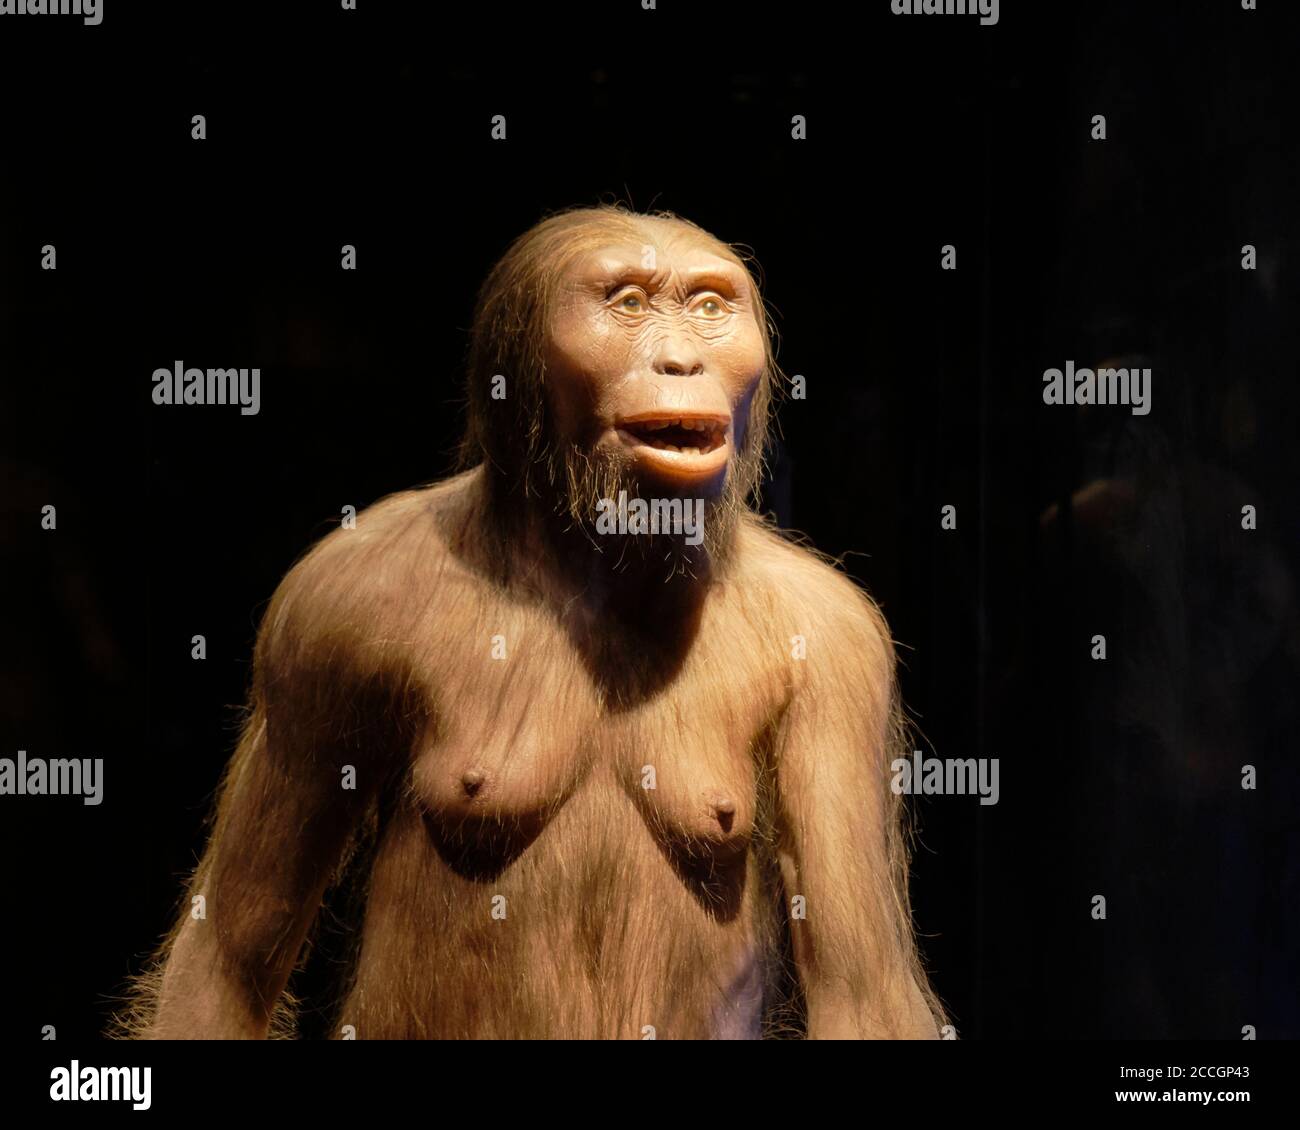 Australopithecus Afarensis Inside Museum of Anthropology in Mexico City Stock Photo